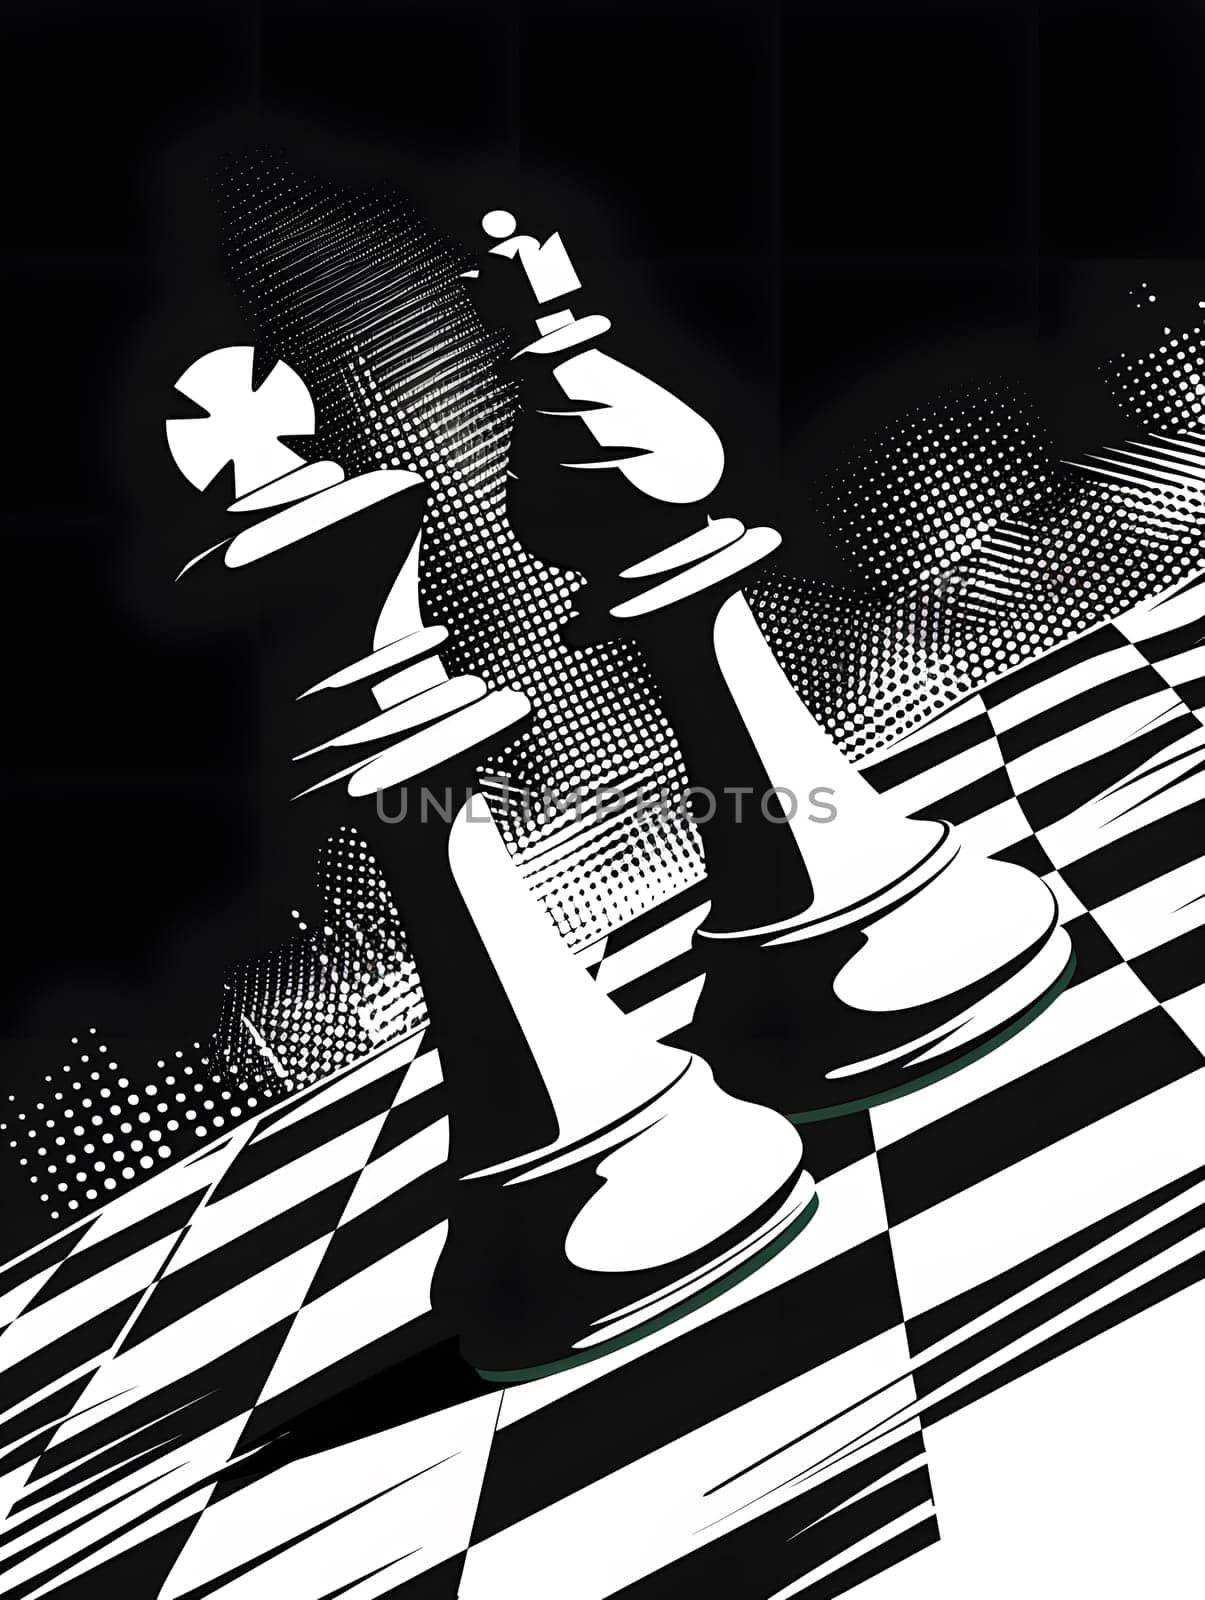 A monochrome image of a black and white chess board with two chess pieces on it. The contrast creates a dramatic effect, enhancing the art of the game